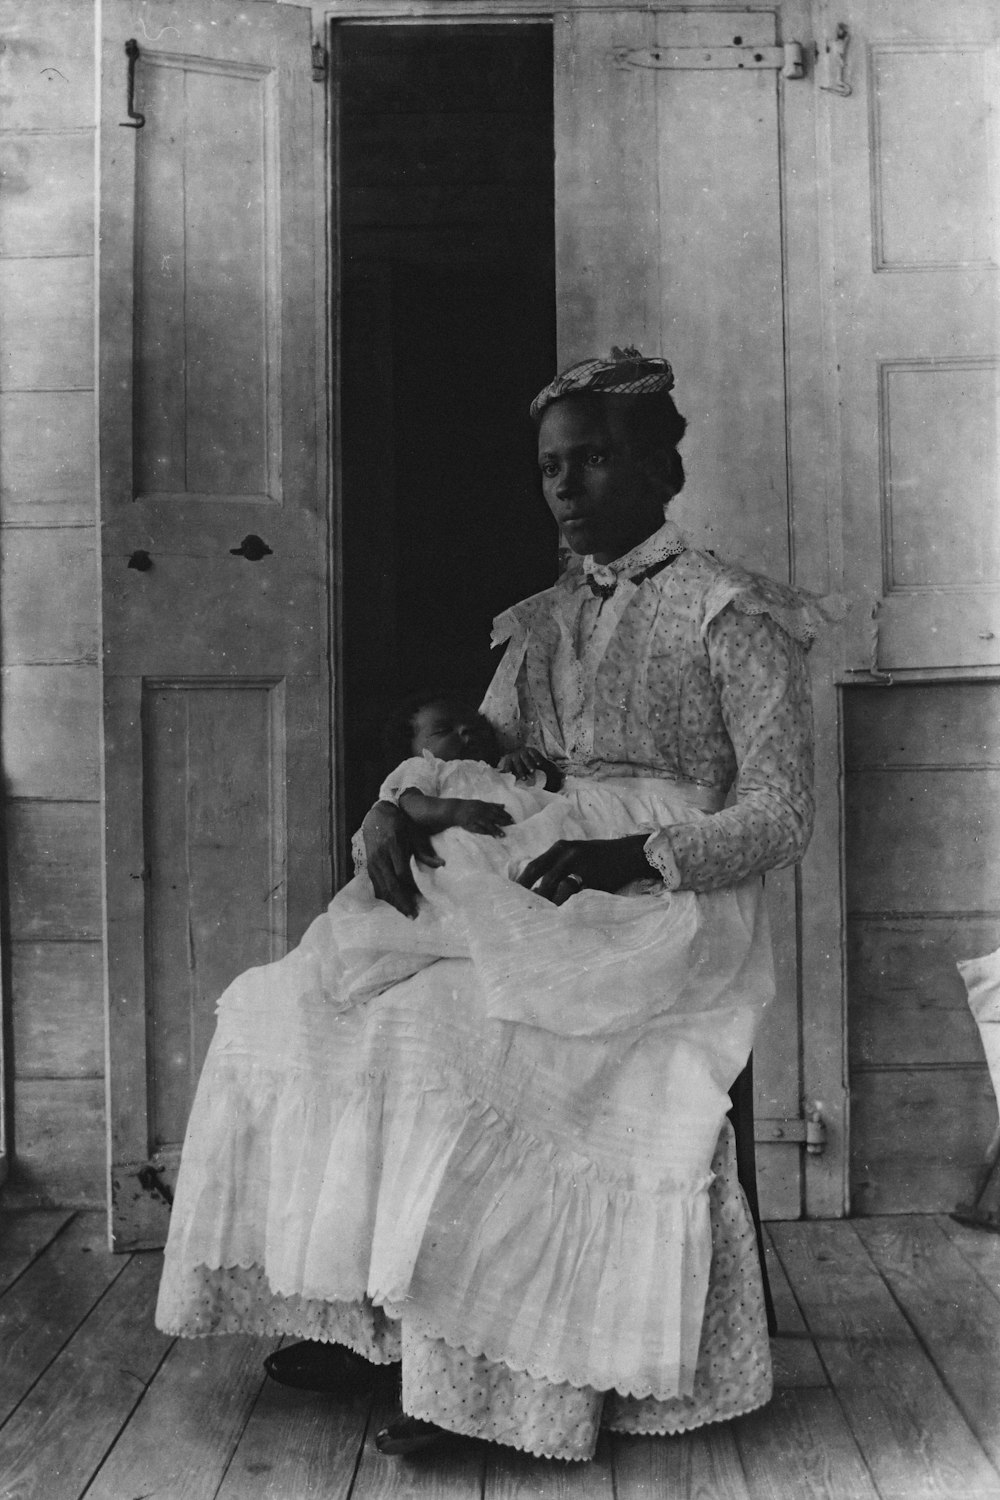 an old photo of a woman holding a baby